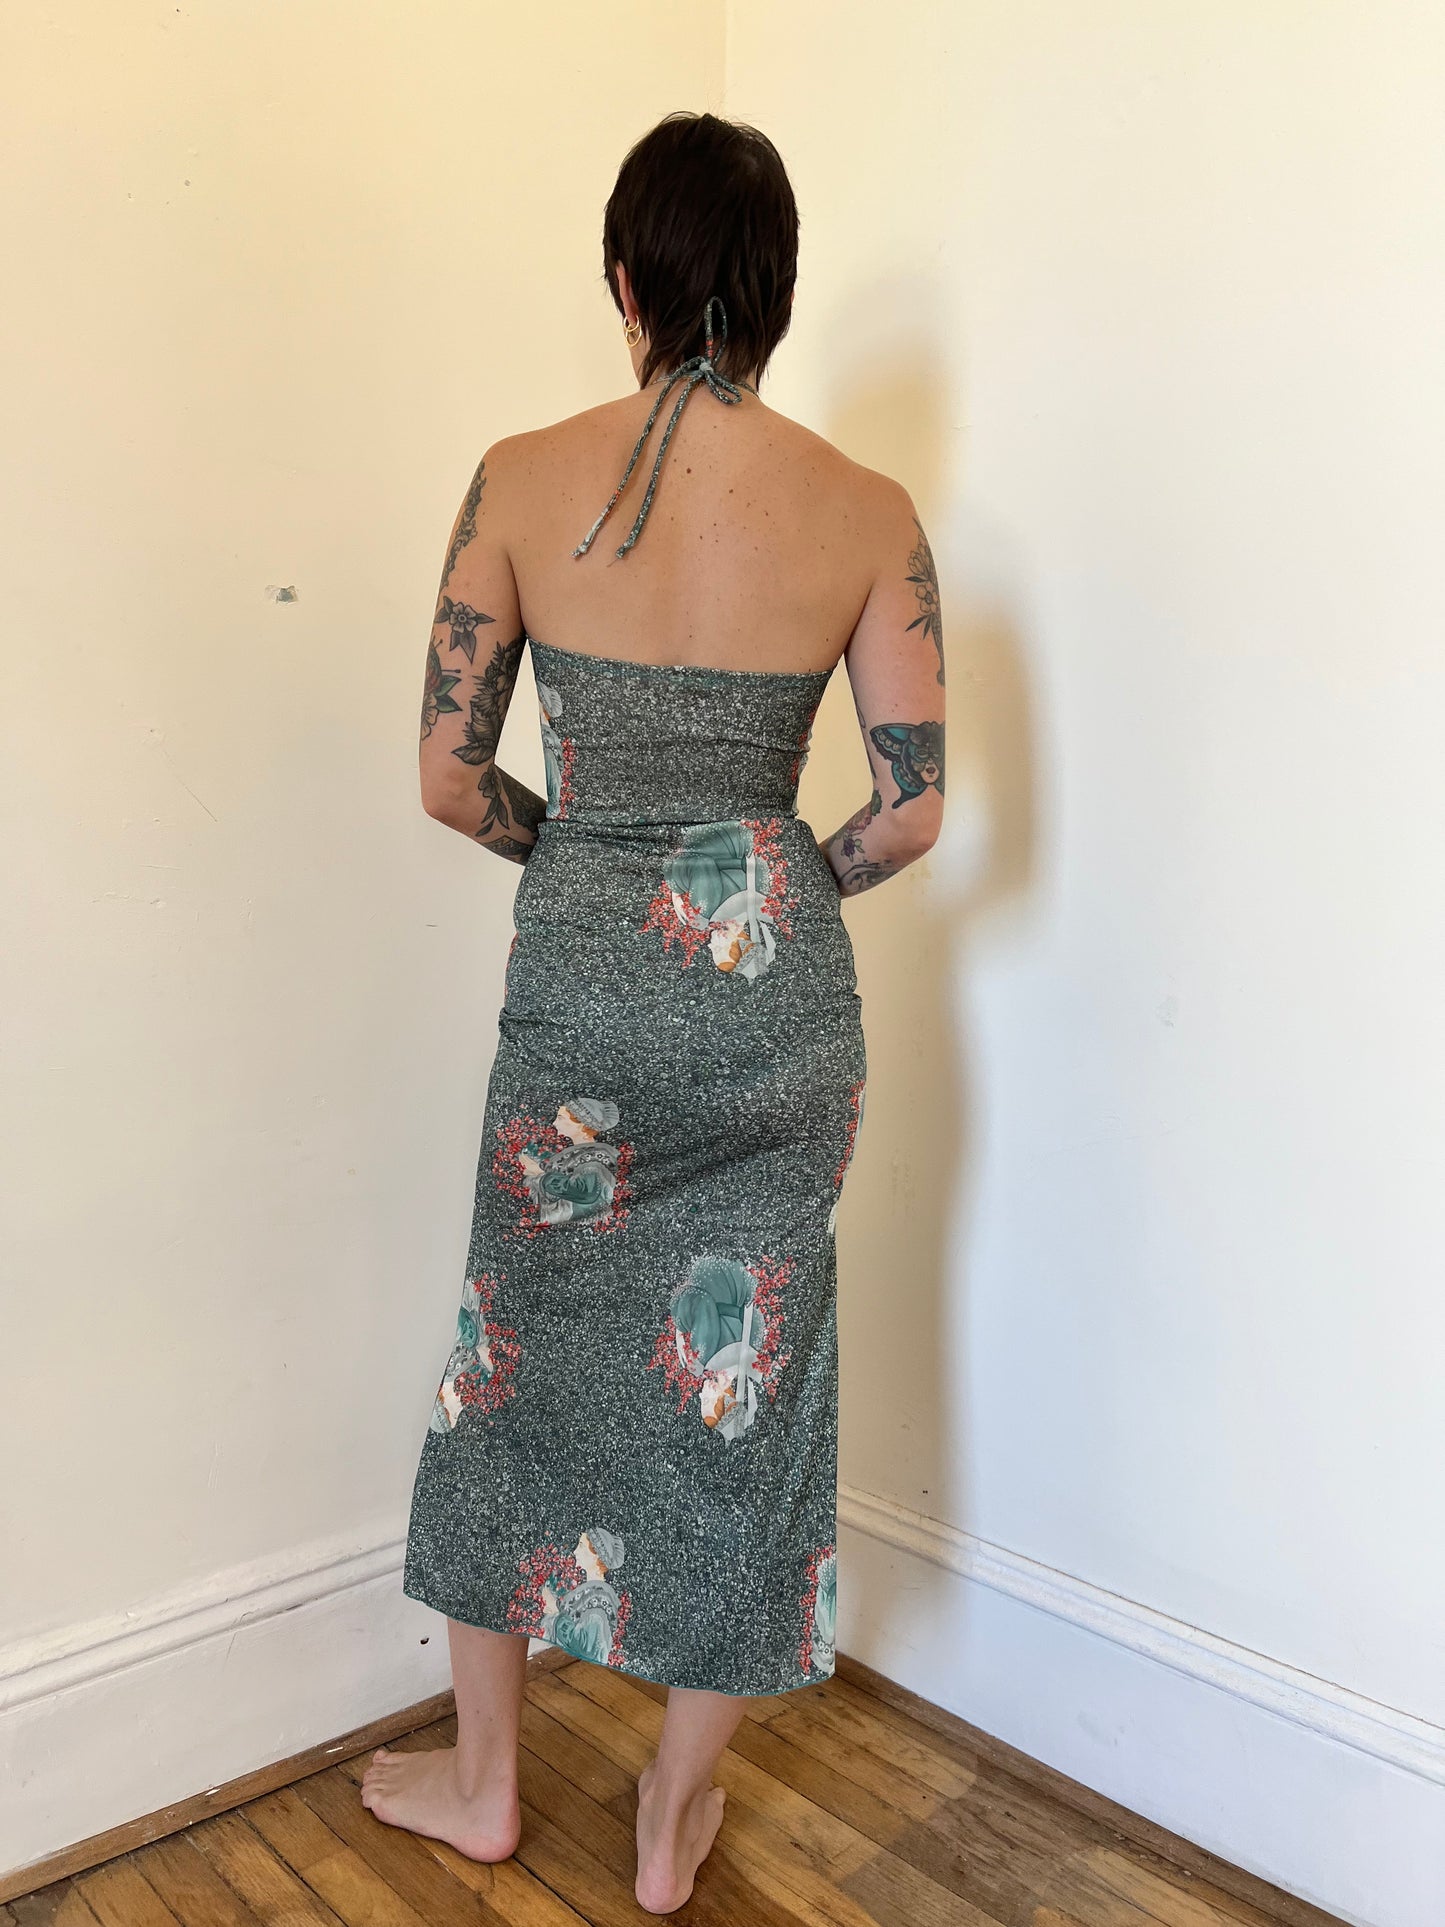 Lady in Waiting Skirt